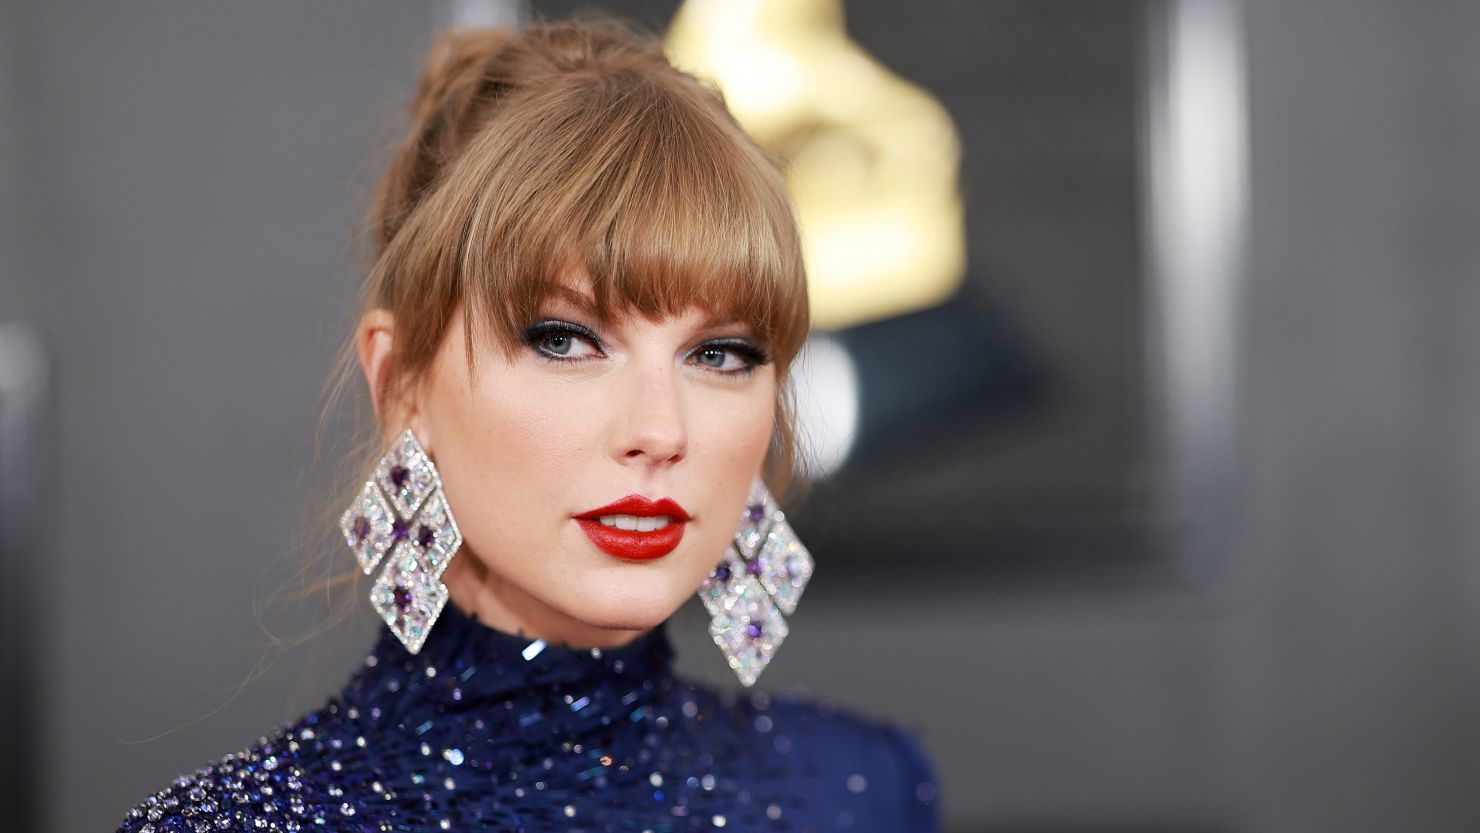 Indiana man charged with stalking, harassing Taylor Swift after ...